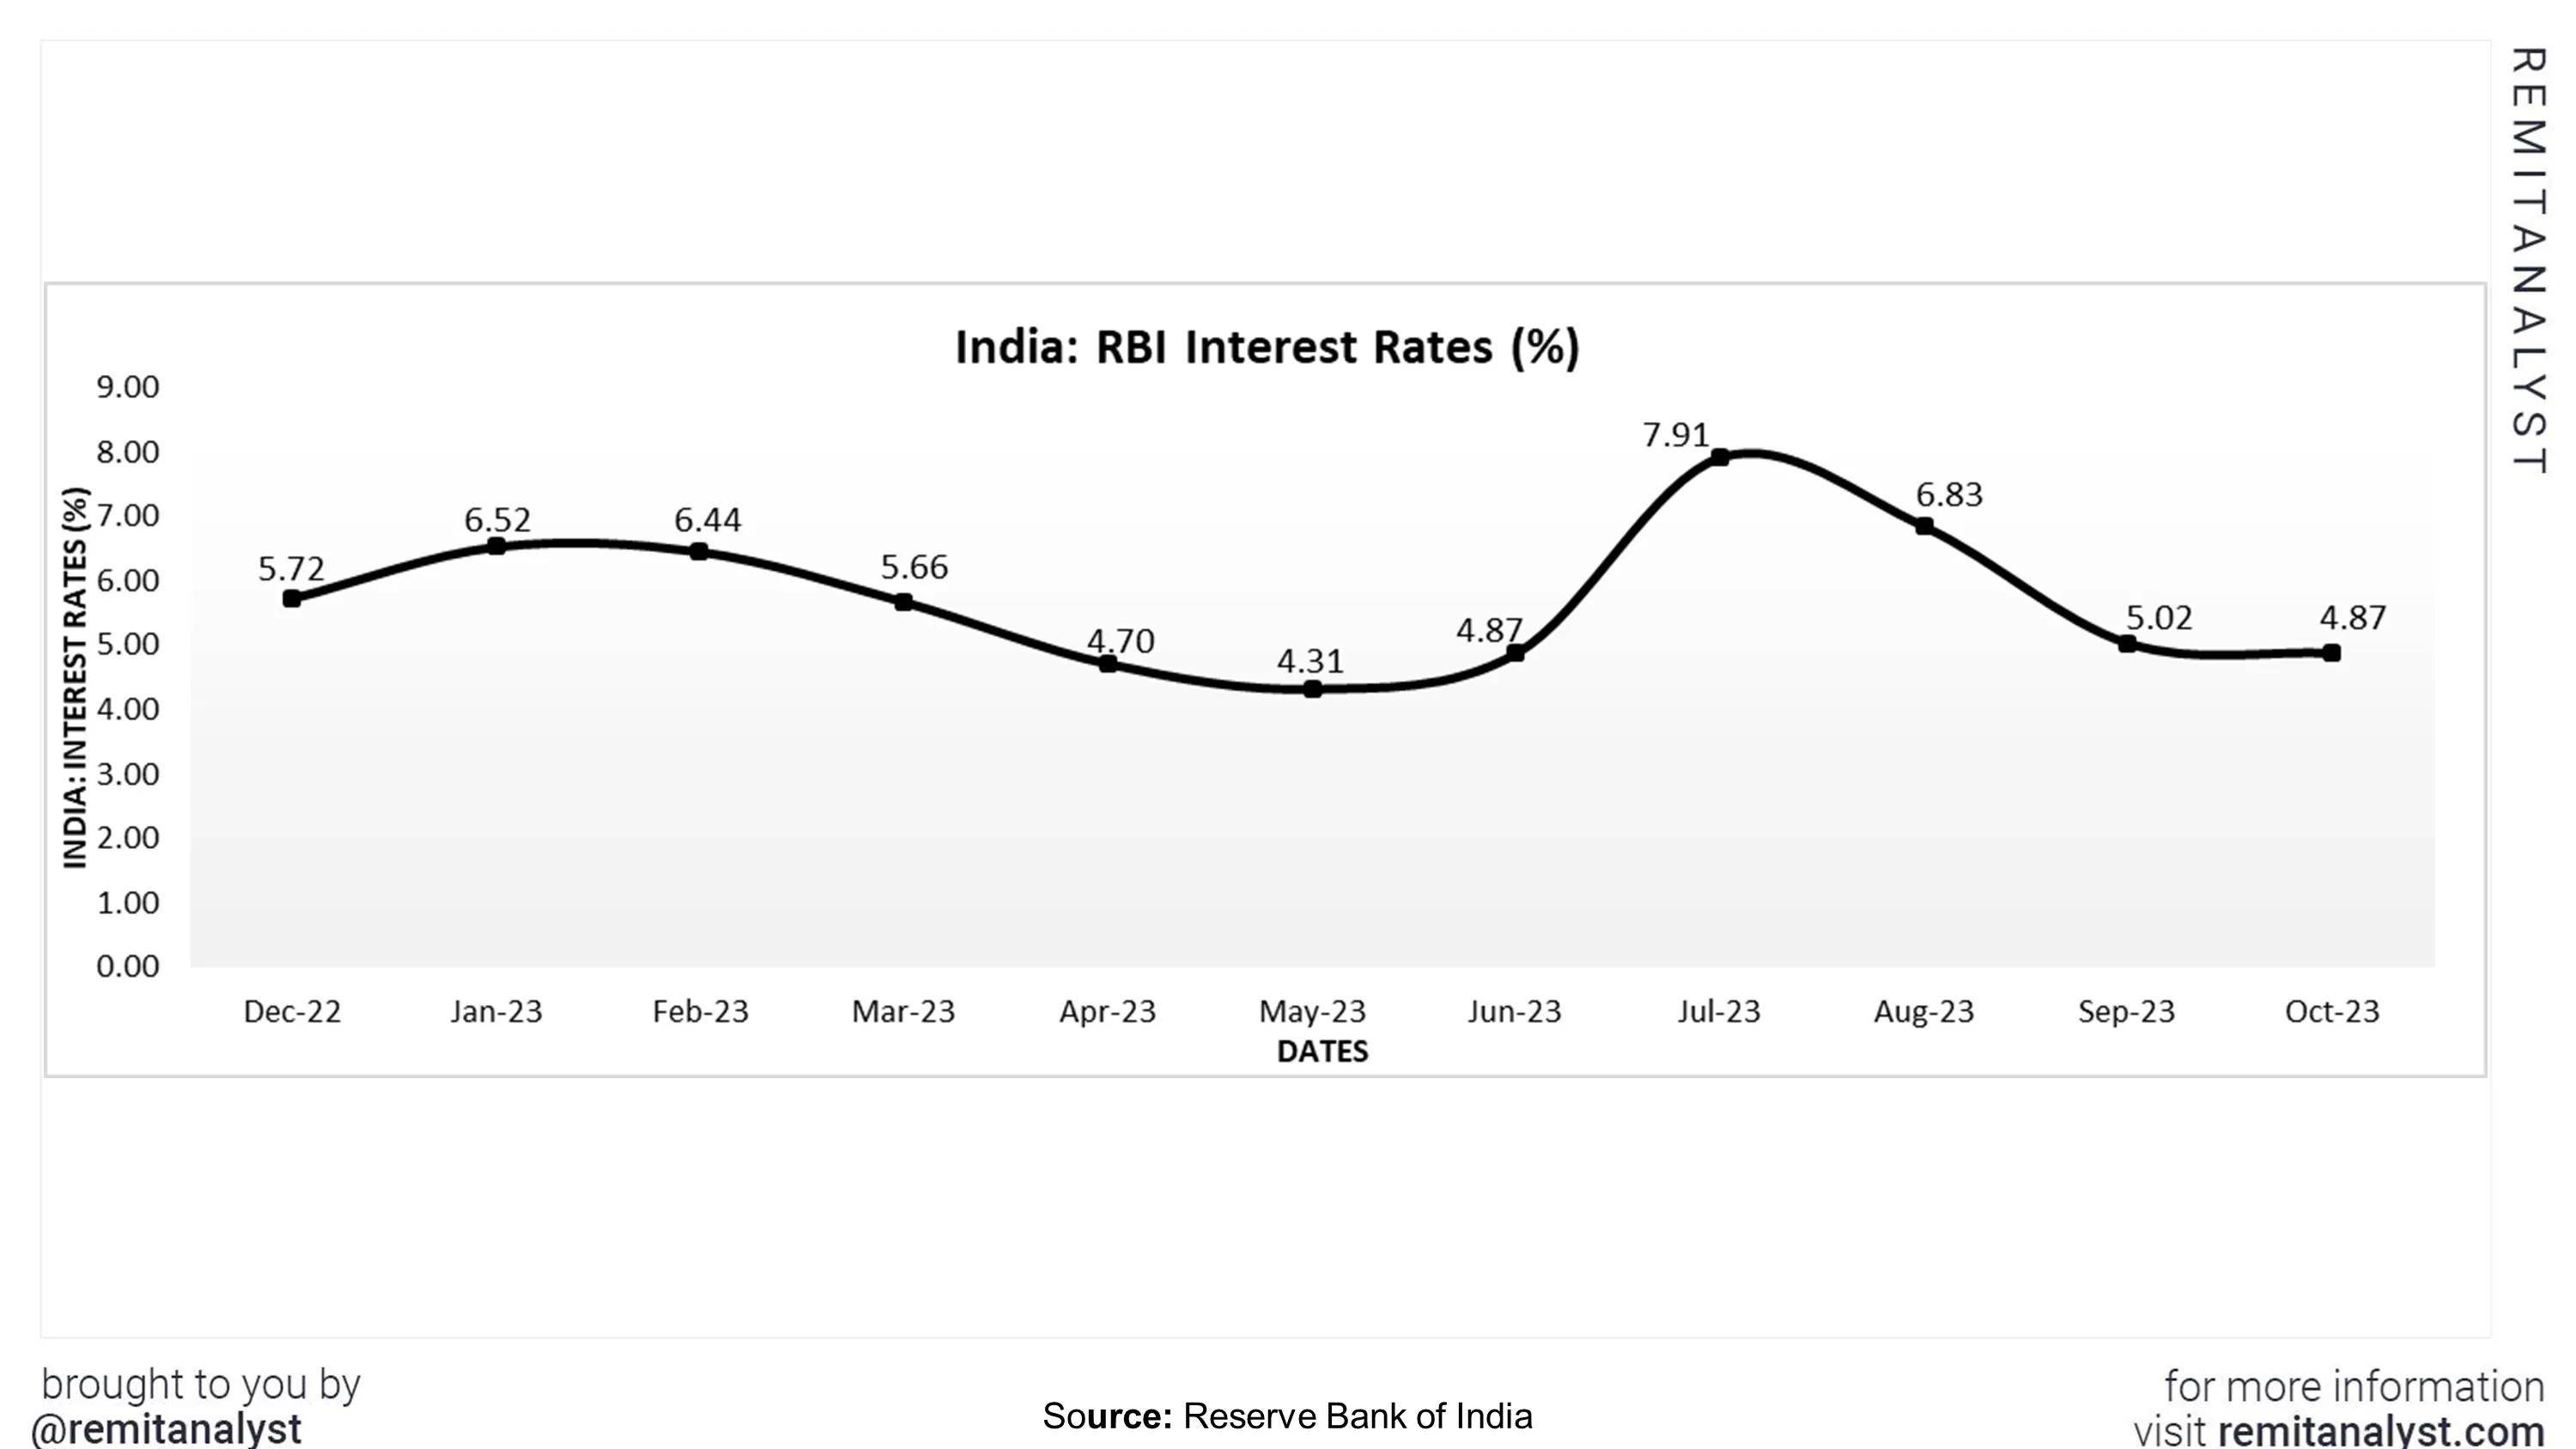 interest-rates-india-from-dec-2022-to-oct-2023